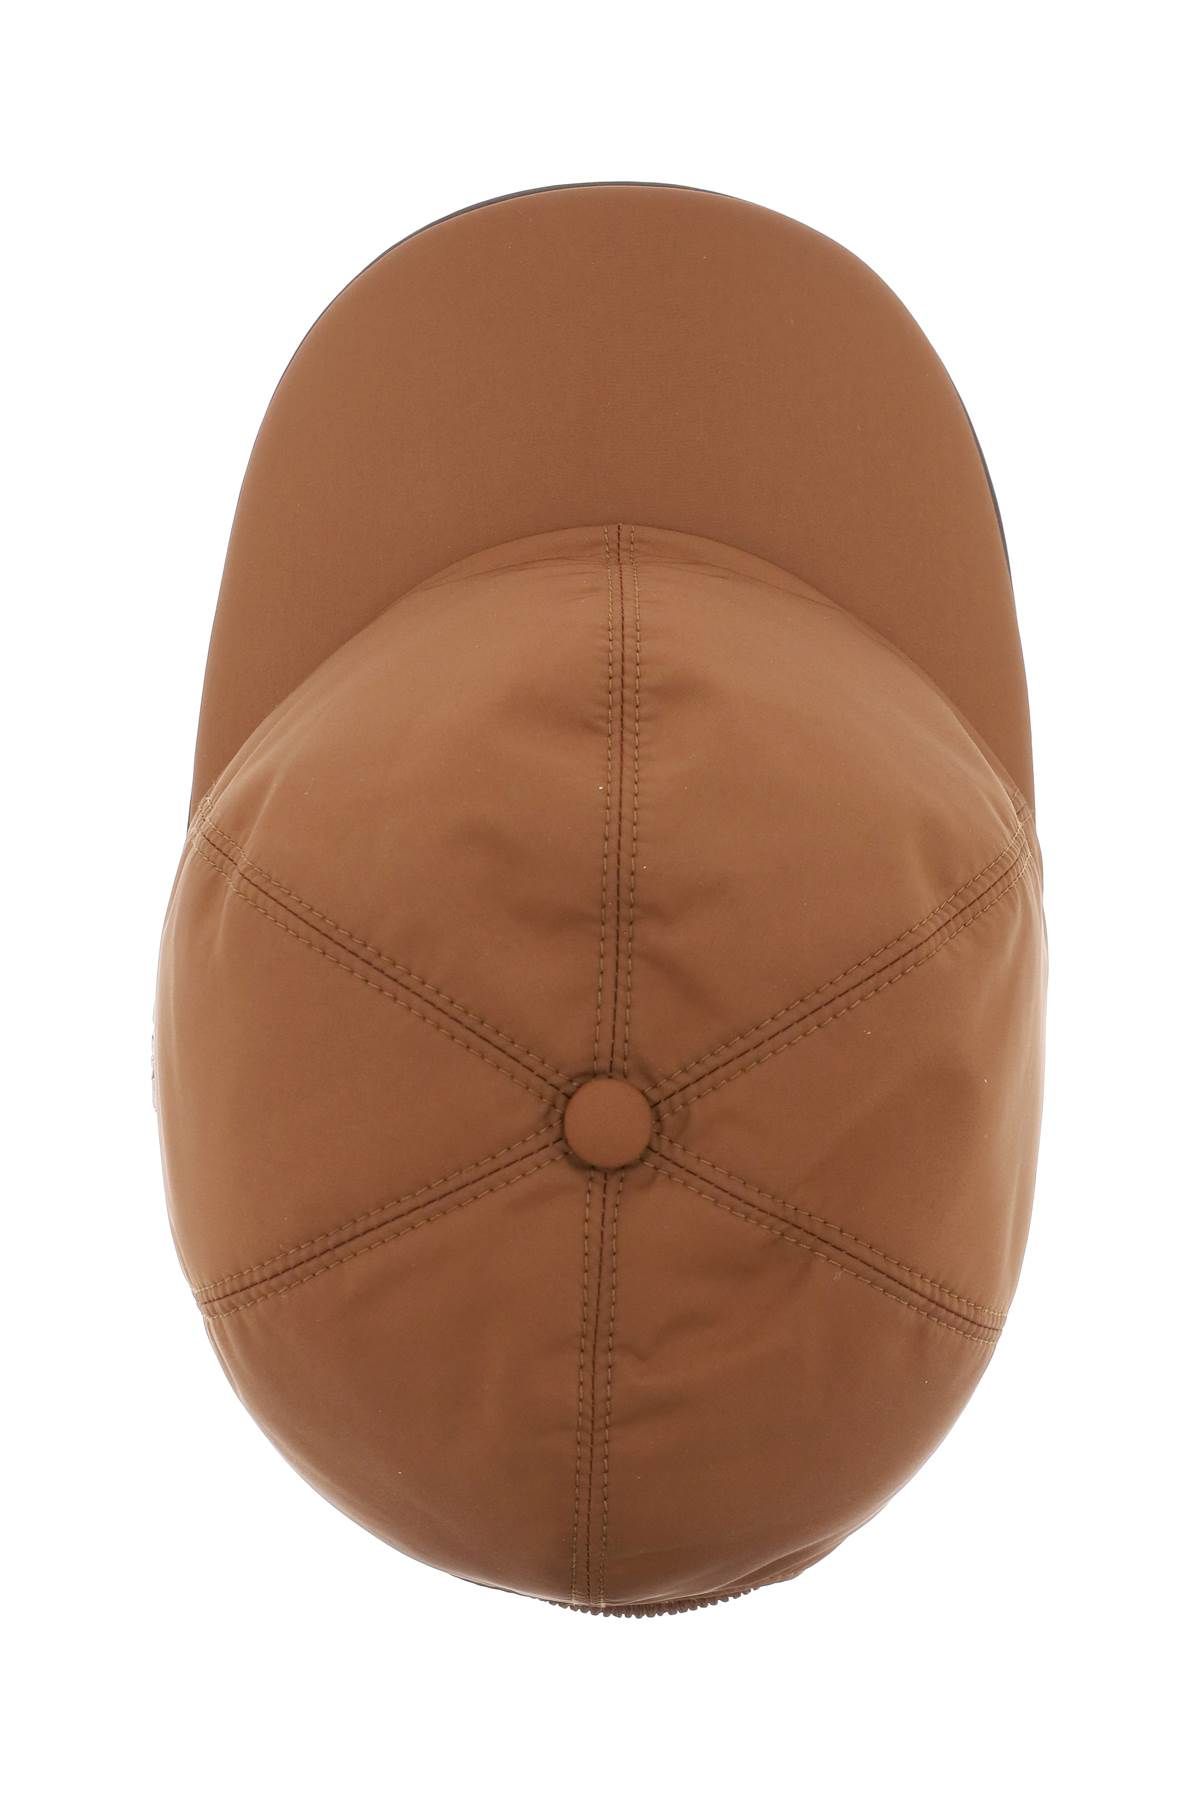 Shop Zegna Baseball Cap With Leather Trim In Brown